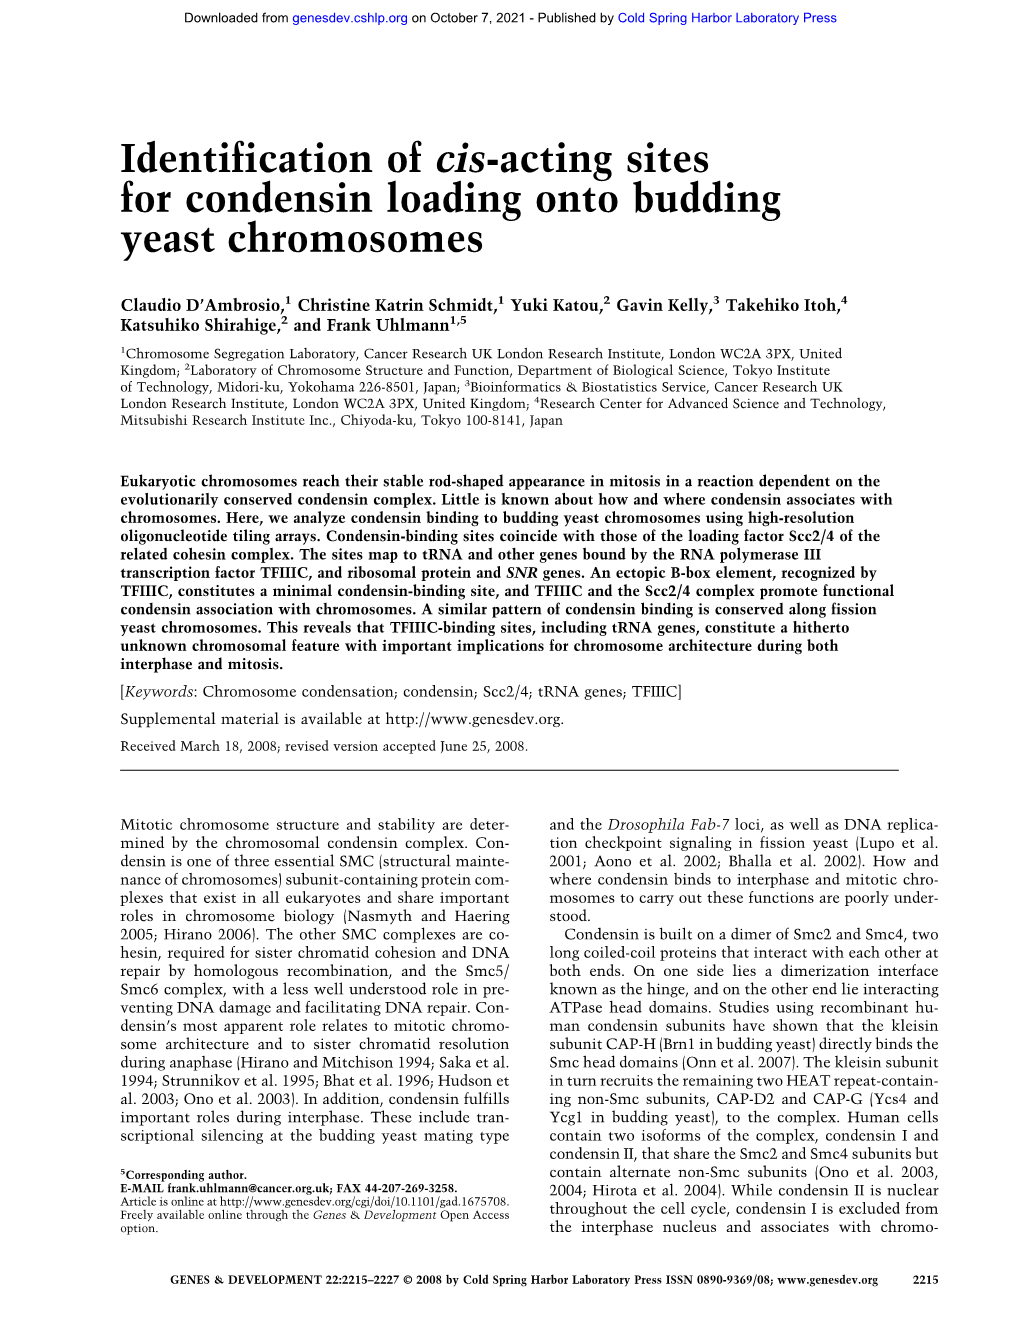 Identification of Cis-Acting Sites for Condensin Loading Onto Budding Yeast Chromosomes